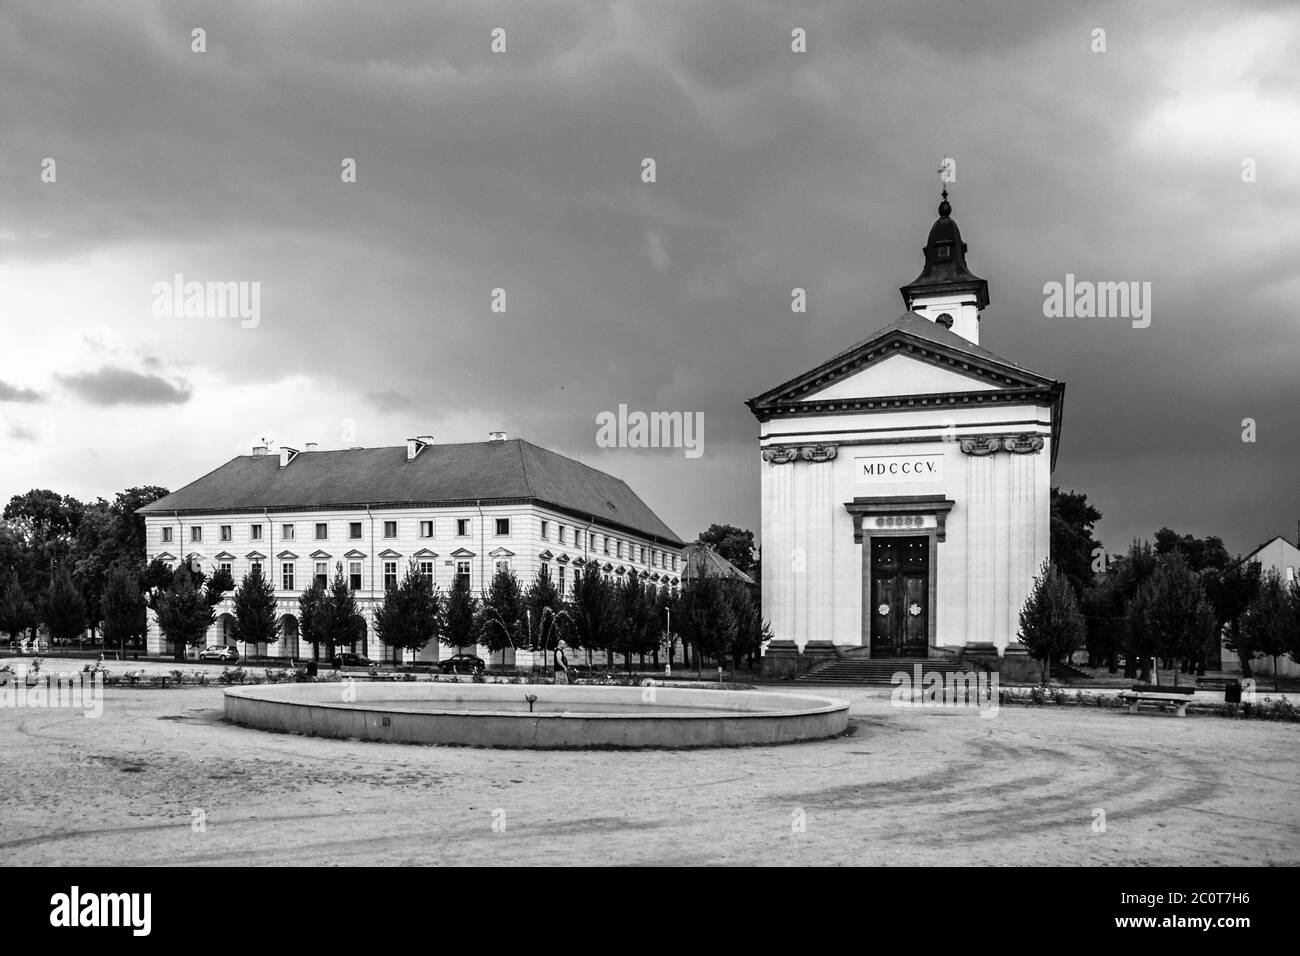 Czechoslovak Army Square with baroque church in Terezin fortress town, Czech Republic. Black and white image. Stock Photo